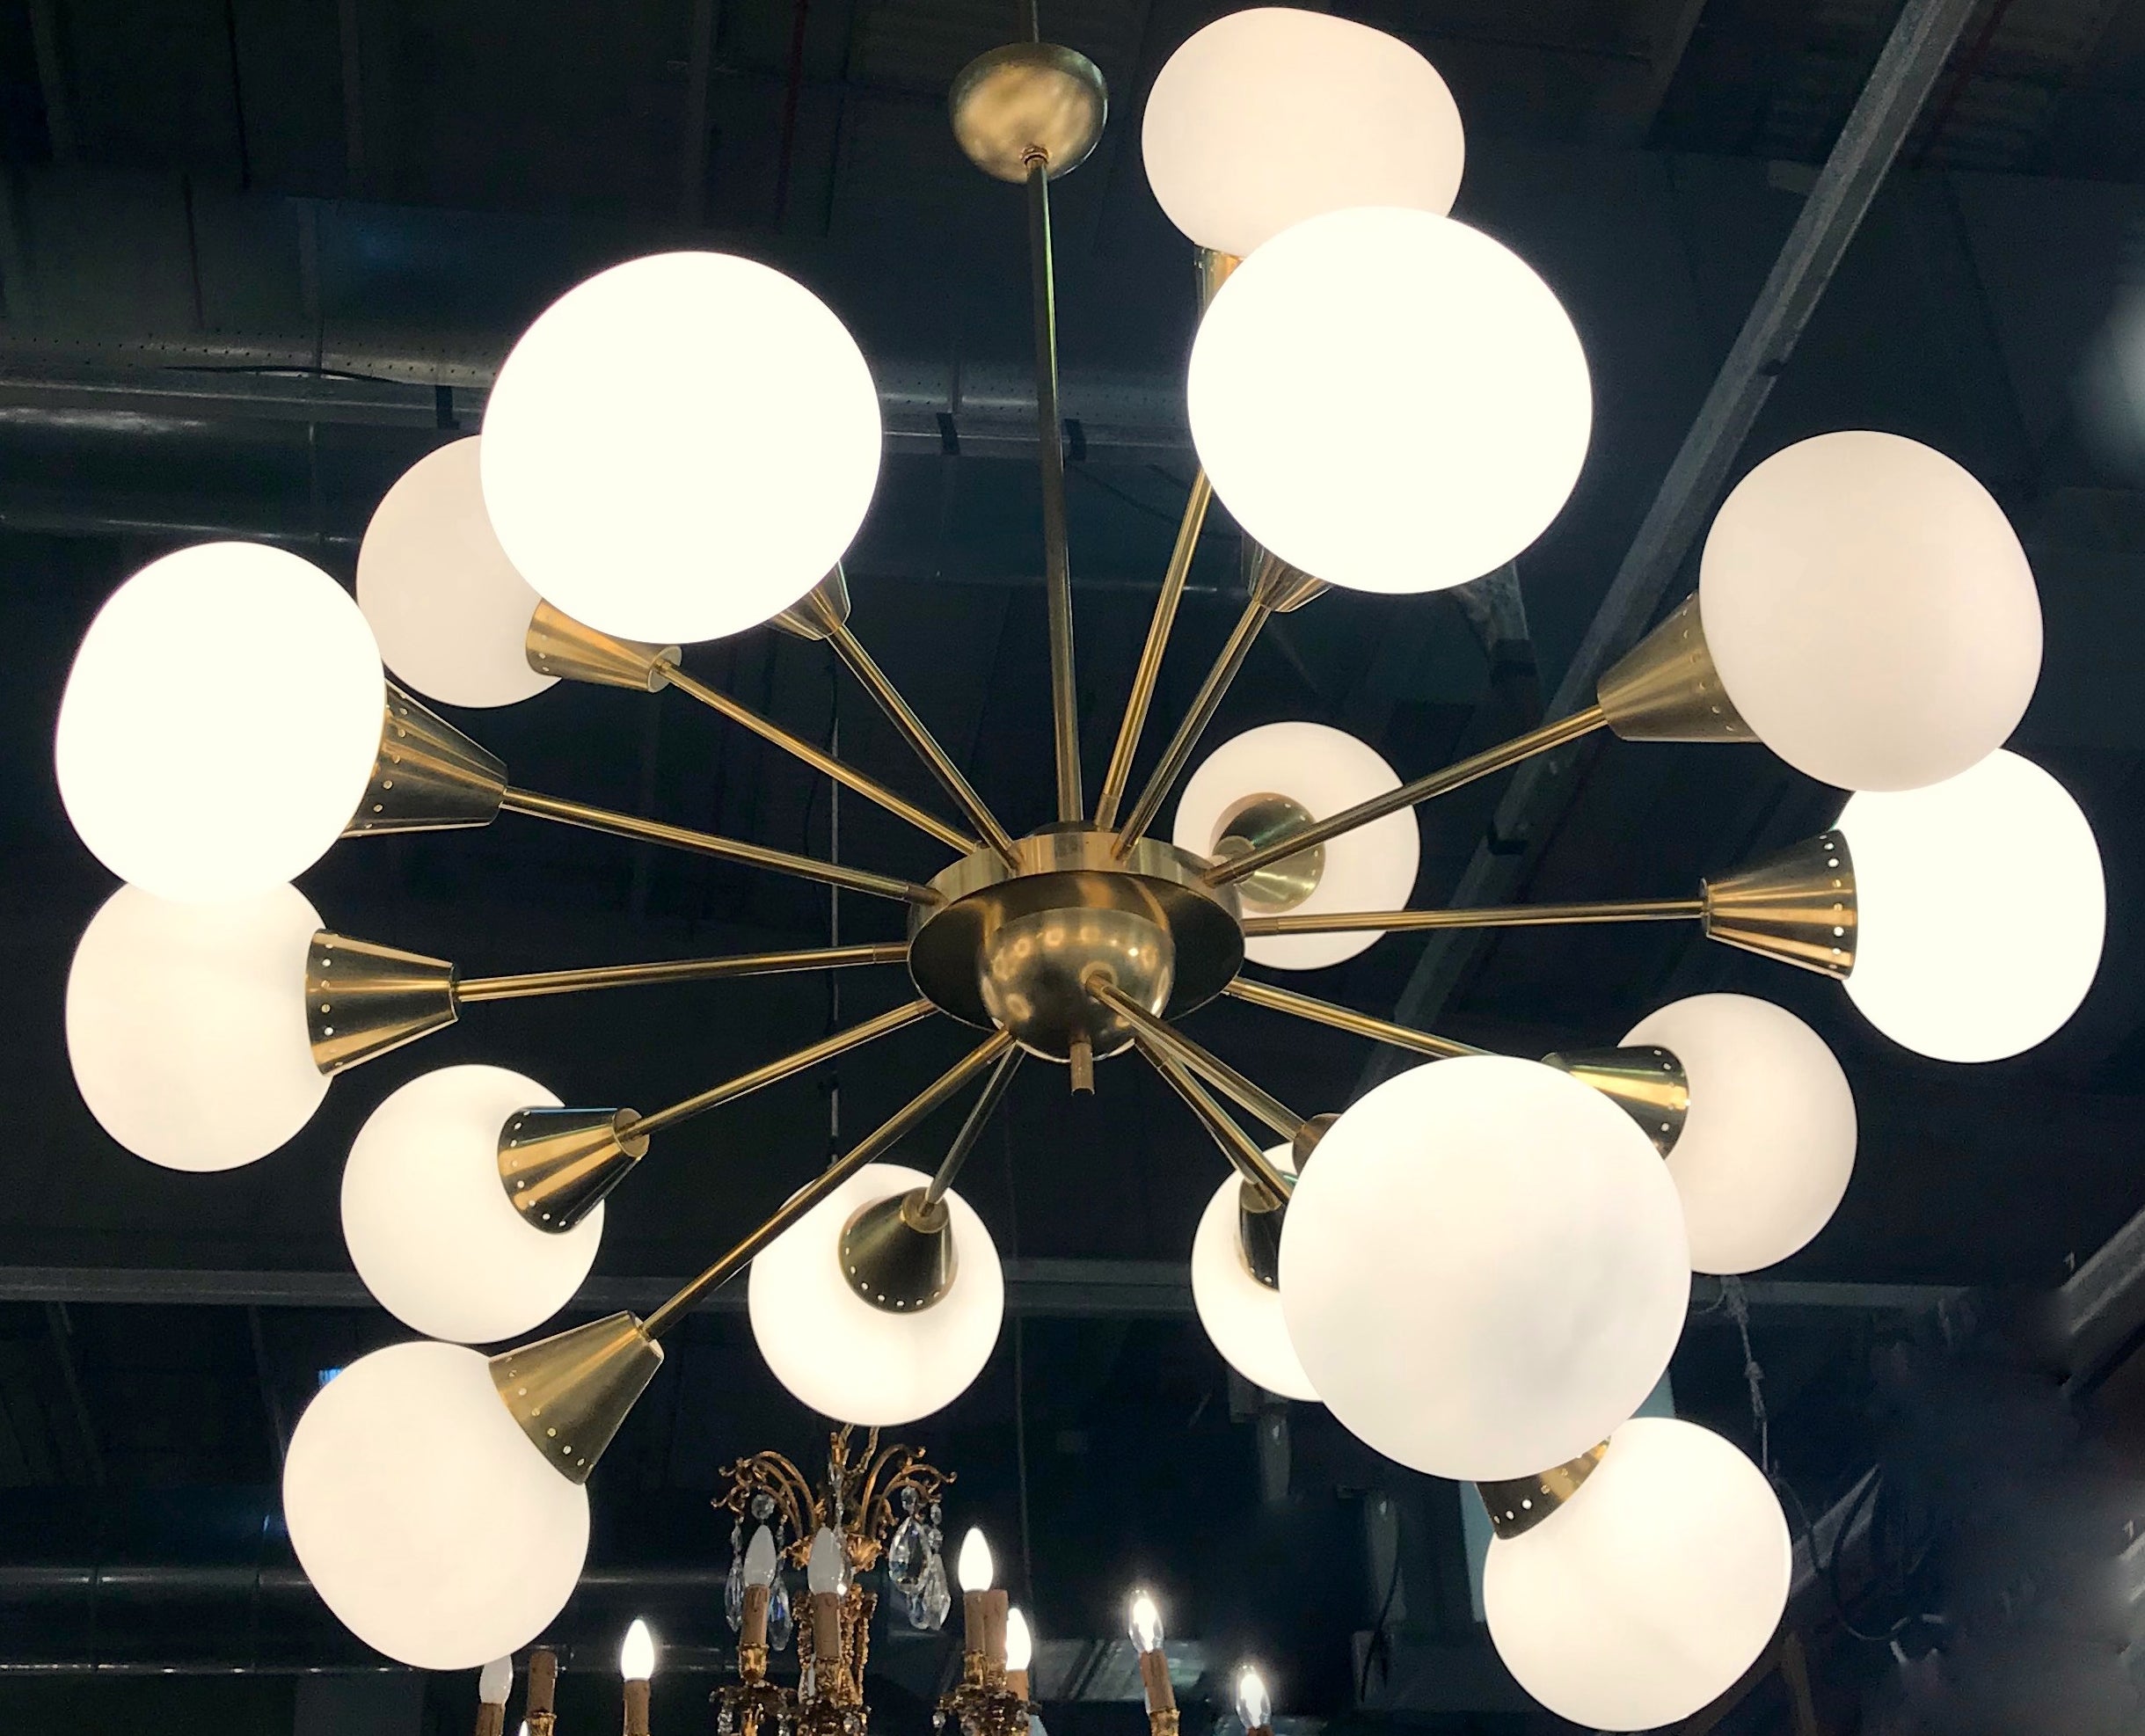 Extraordinary Italian midcentury brass and 16 opaline sphere murano glass large Sputnik chandelier.
Available also a pair. The brass height is customizable.
16 E27 light bulbs.